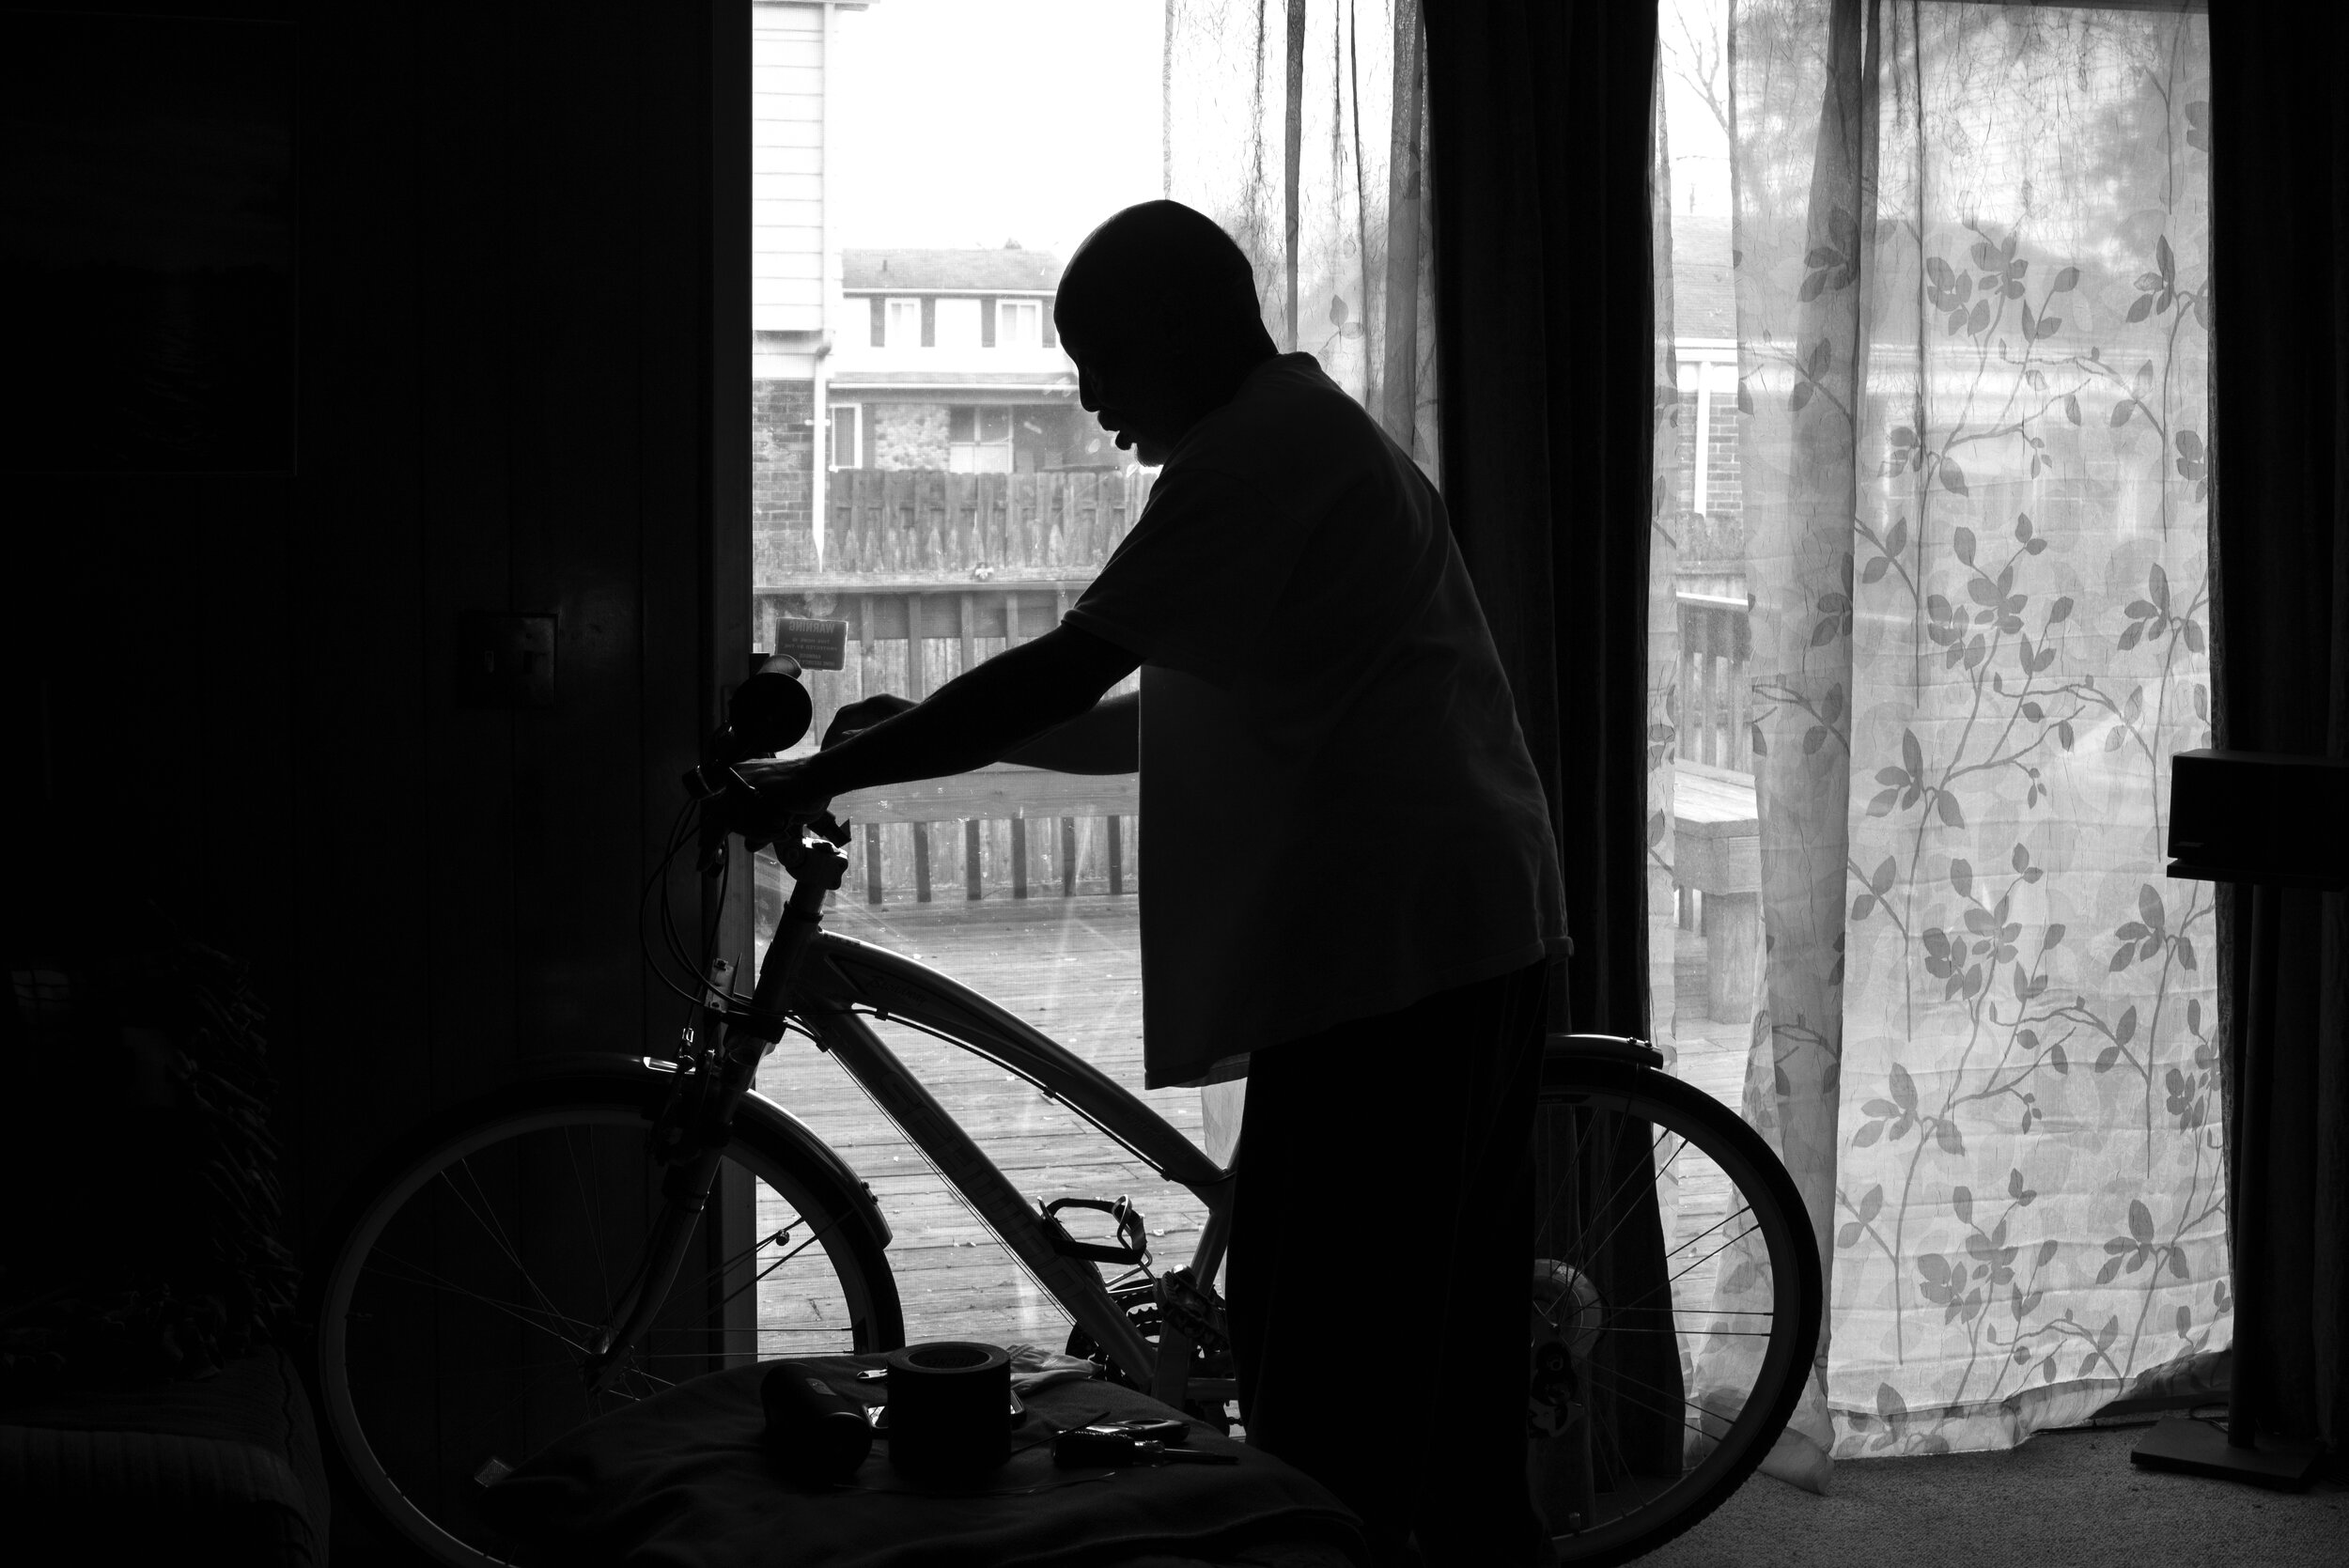   My dad has several bicycles that he has found, repaired and has made his own personal customizations to. He also gives bikes away to people who are in need of one. Here, he makes alterations to one of his bicycles in our family room at our home in 